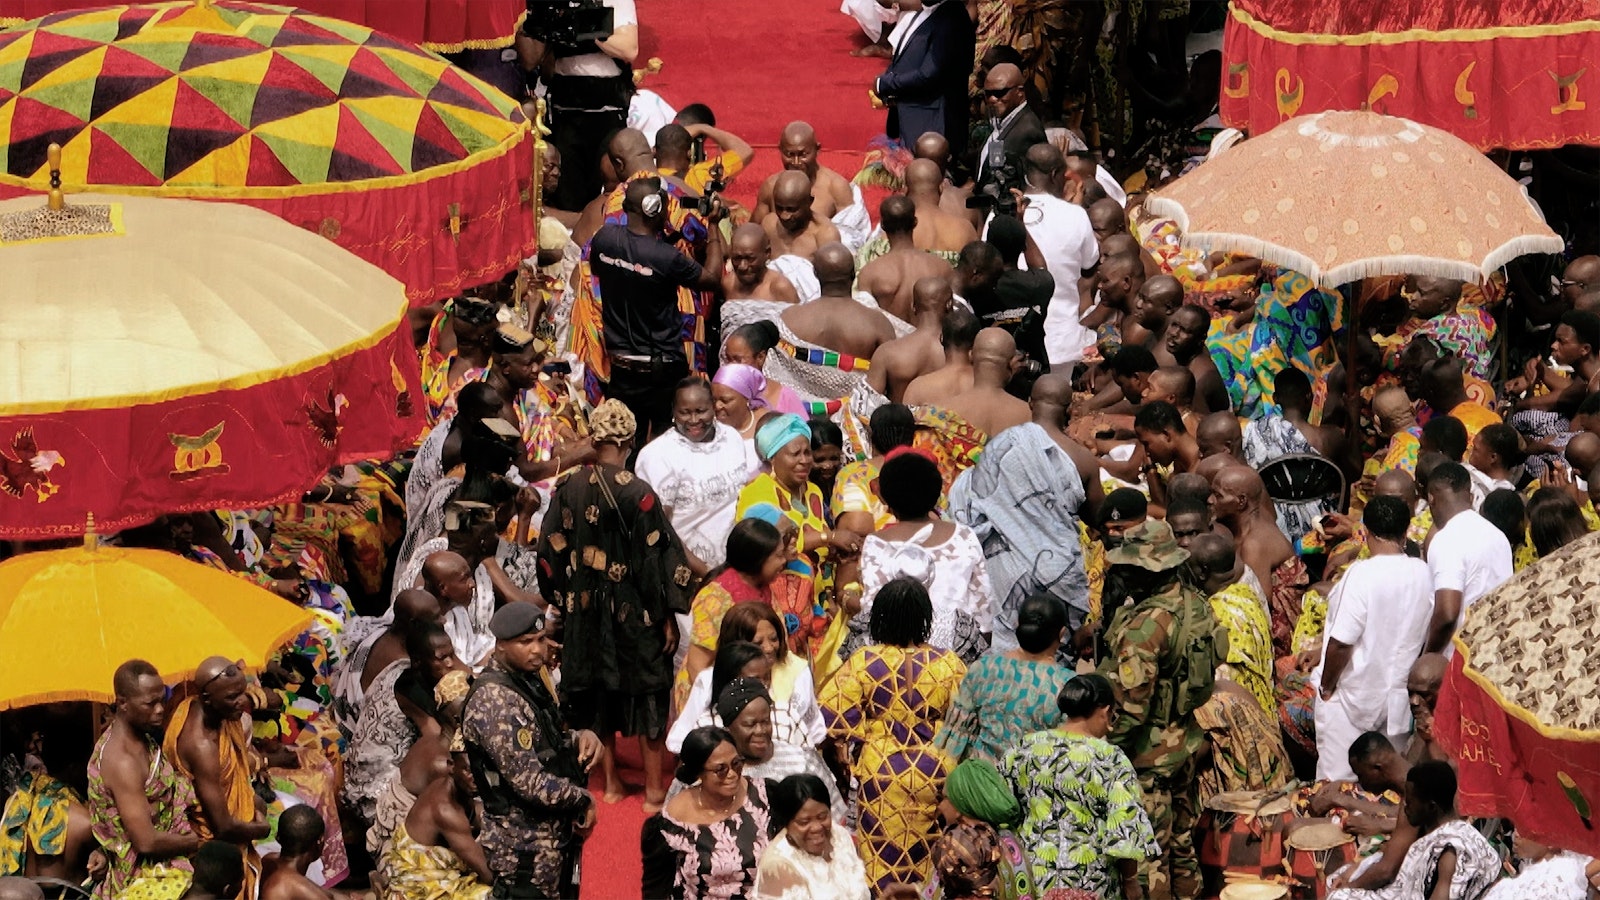 A closer shot of the red carpet leading to the king's throne. Large parasols and people in colourful robes line the way.